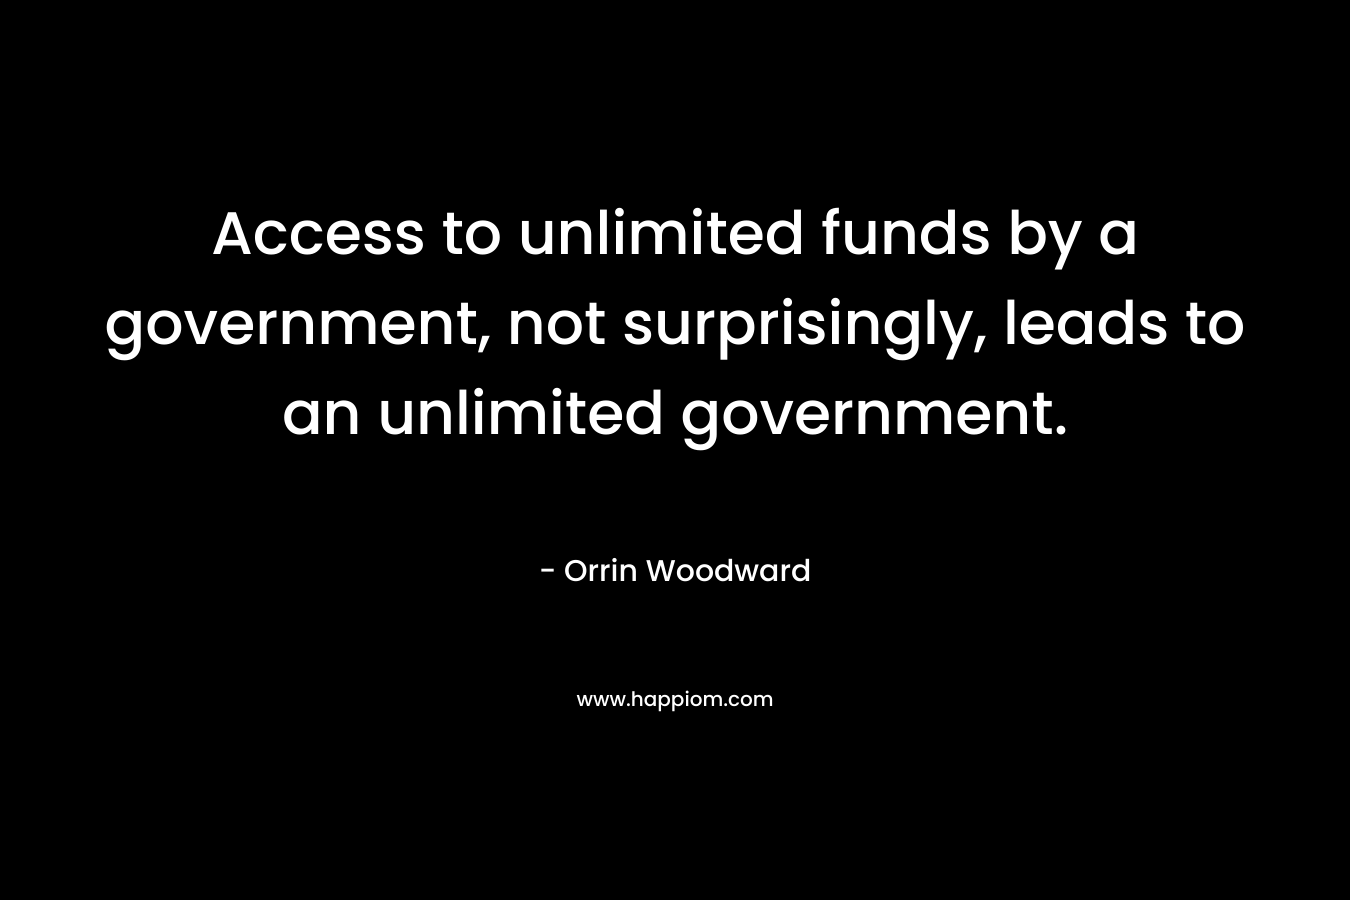 Access to unlimited funds by a government, not surprisingly, leads to an unlimited government.